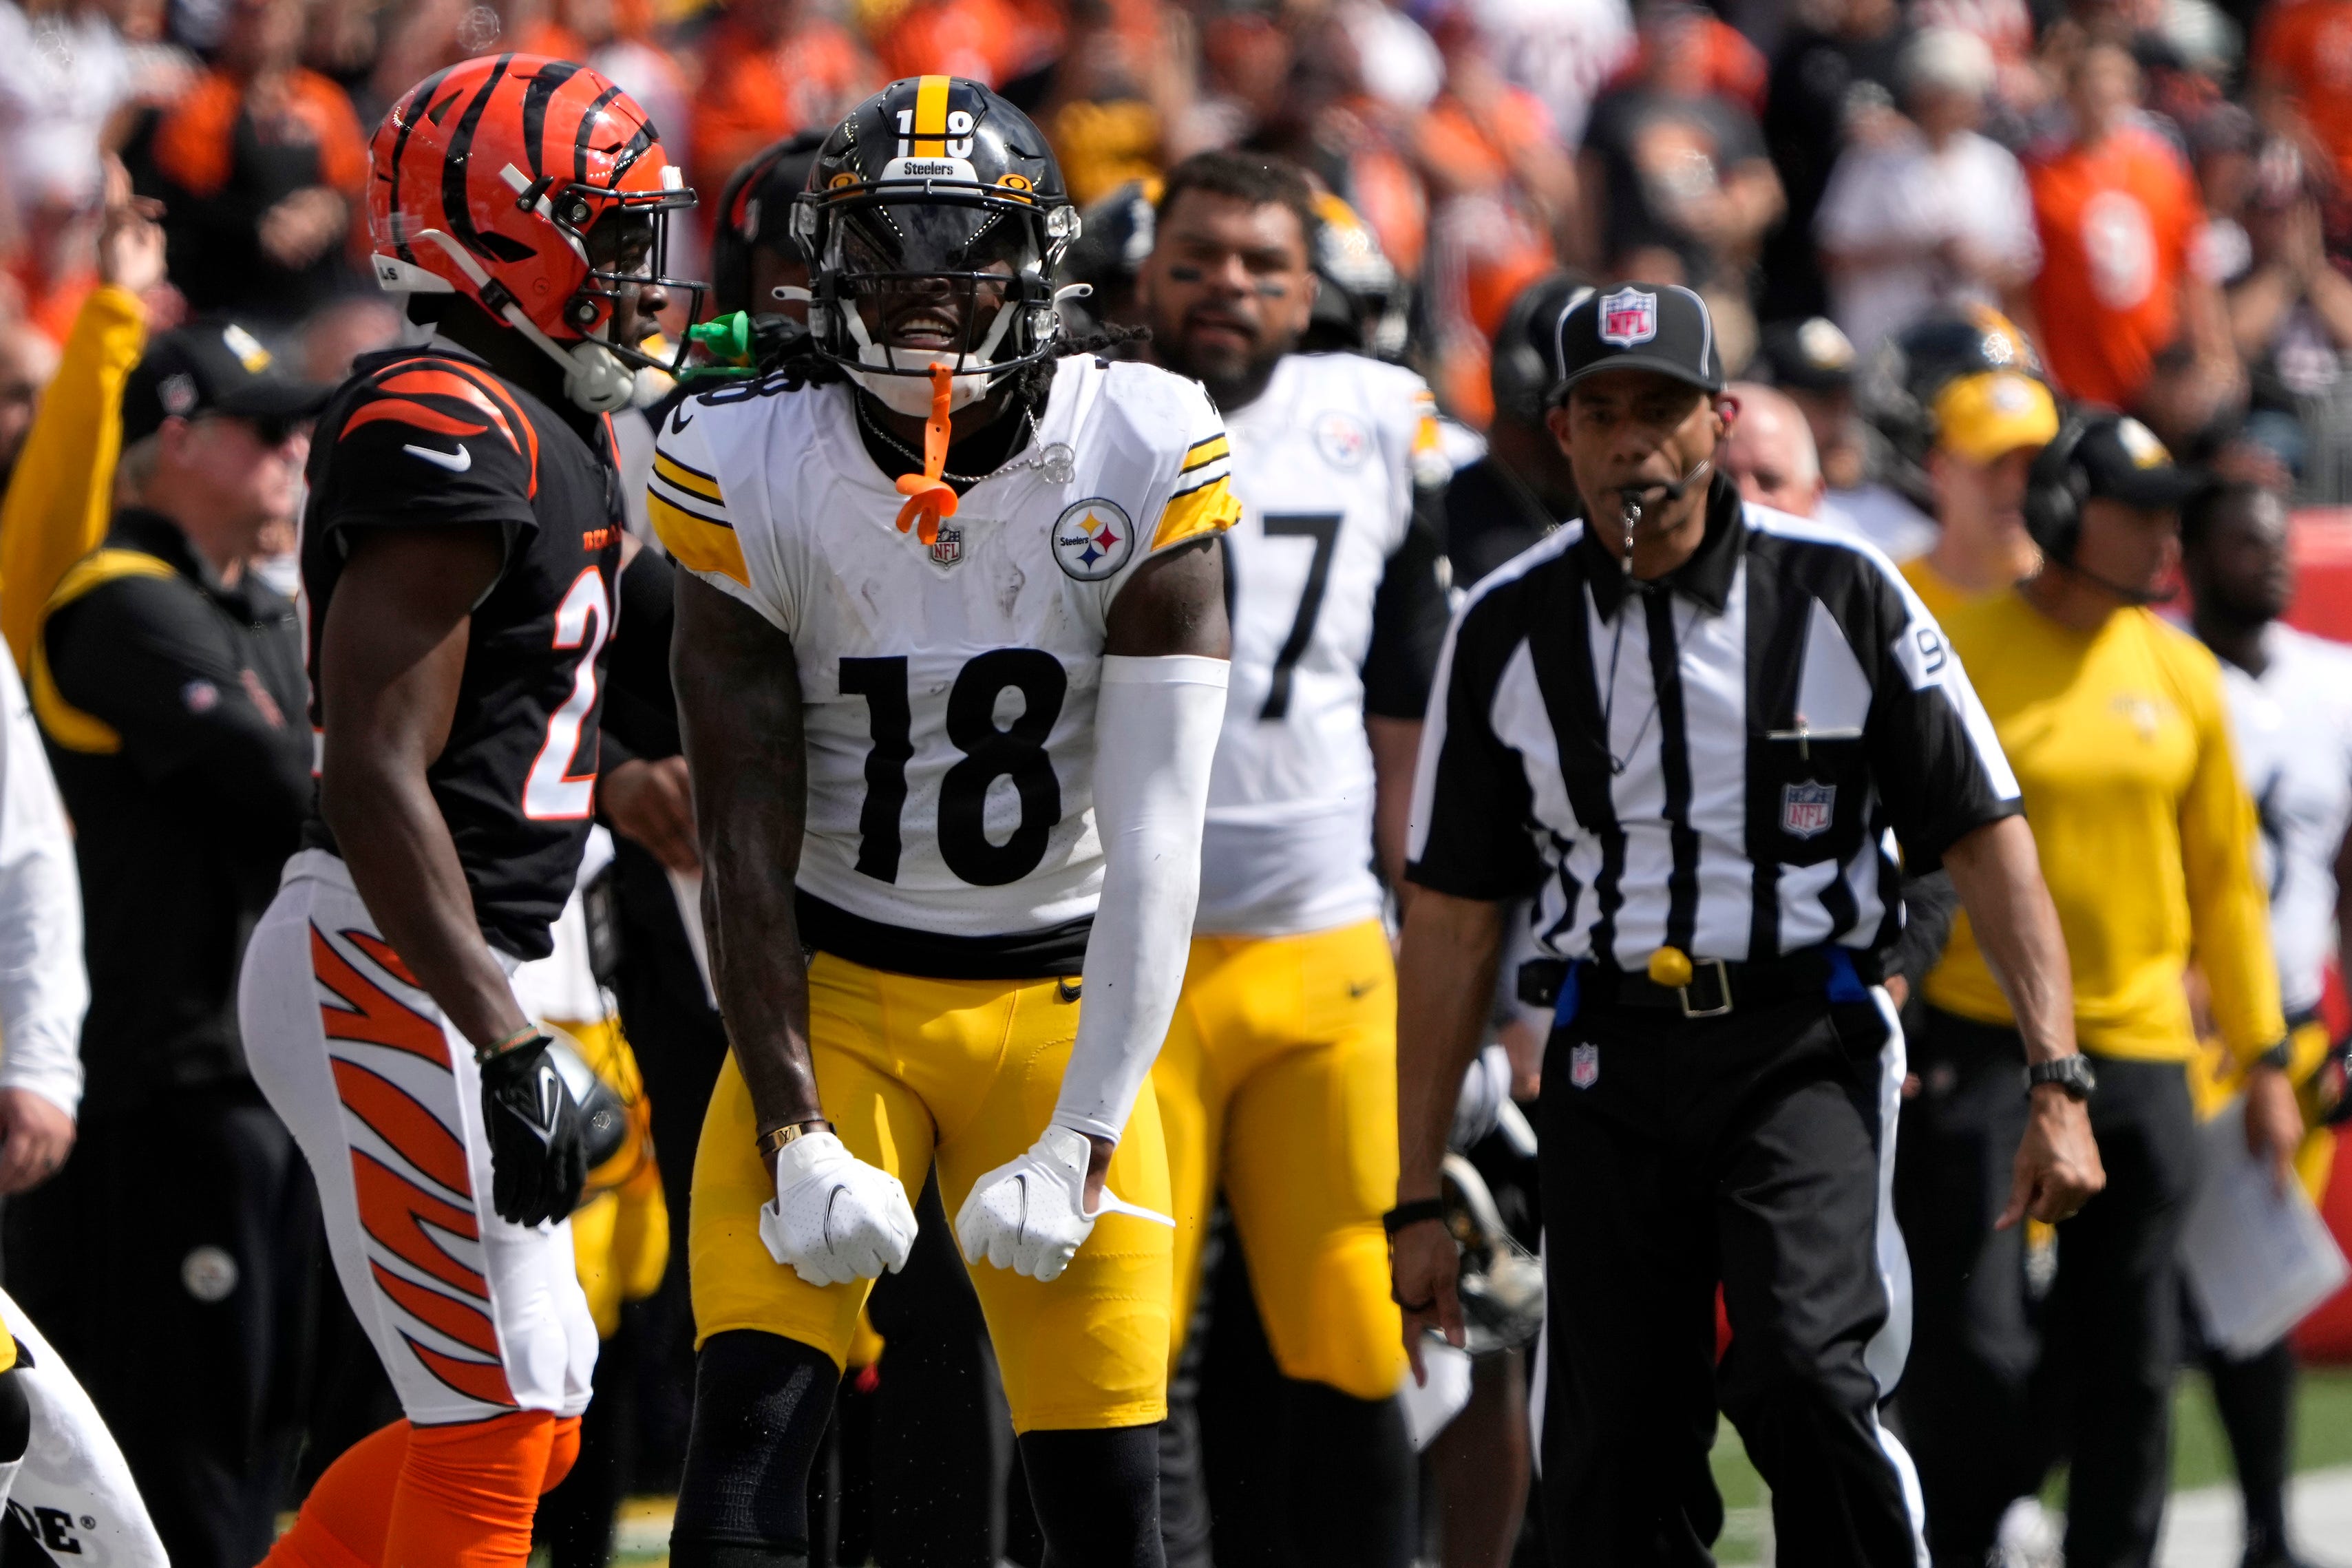 steelers players had heated locker-room argument after loss to browns, per report